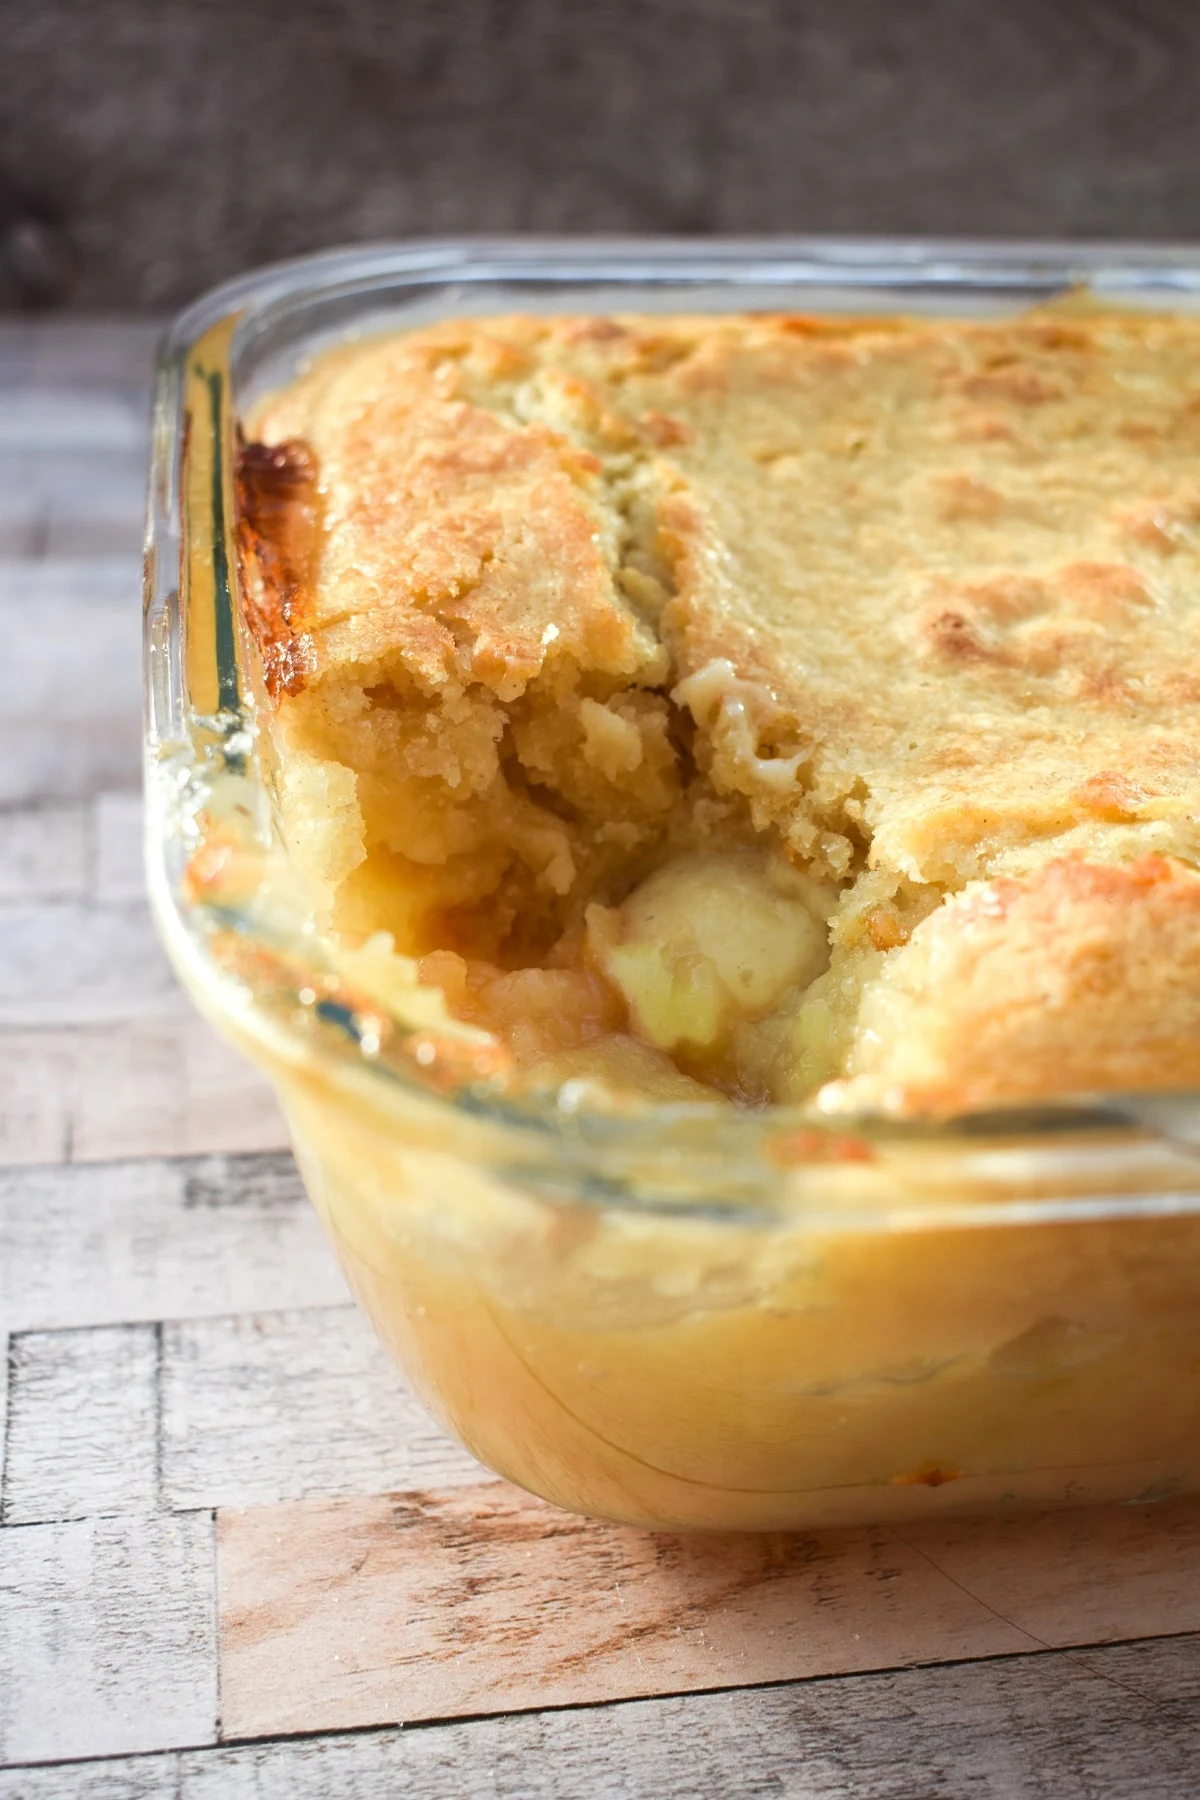 Apple Sponge Pudding in a glass baking dish